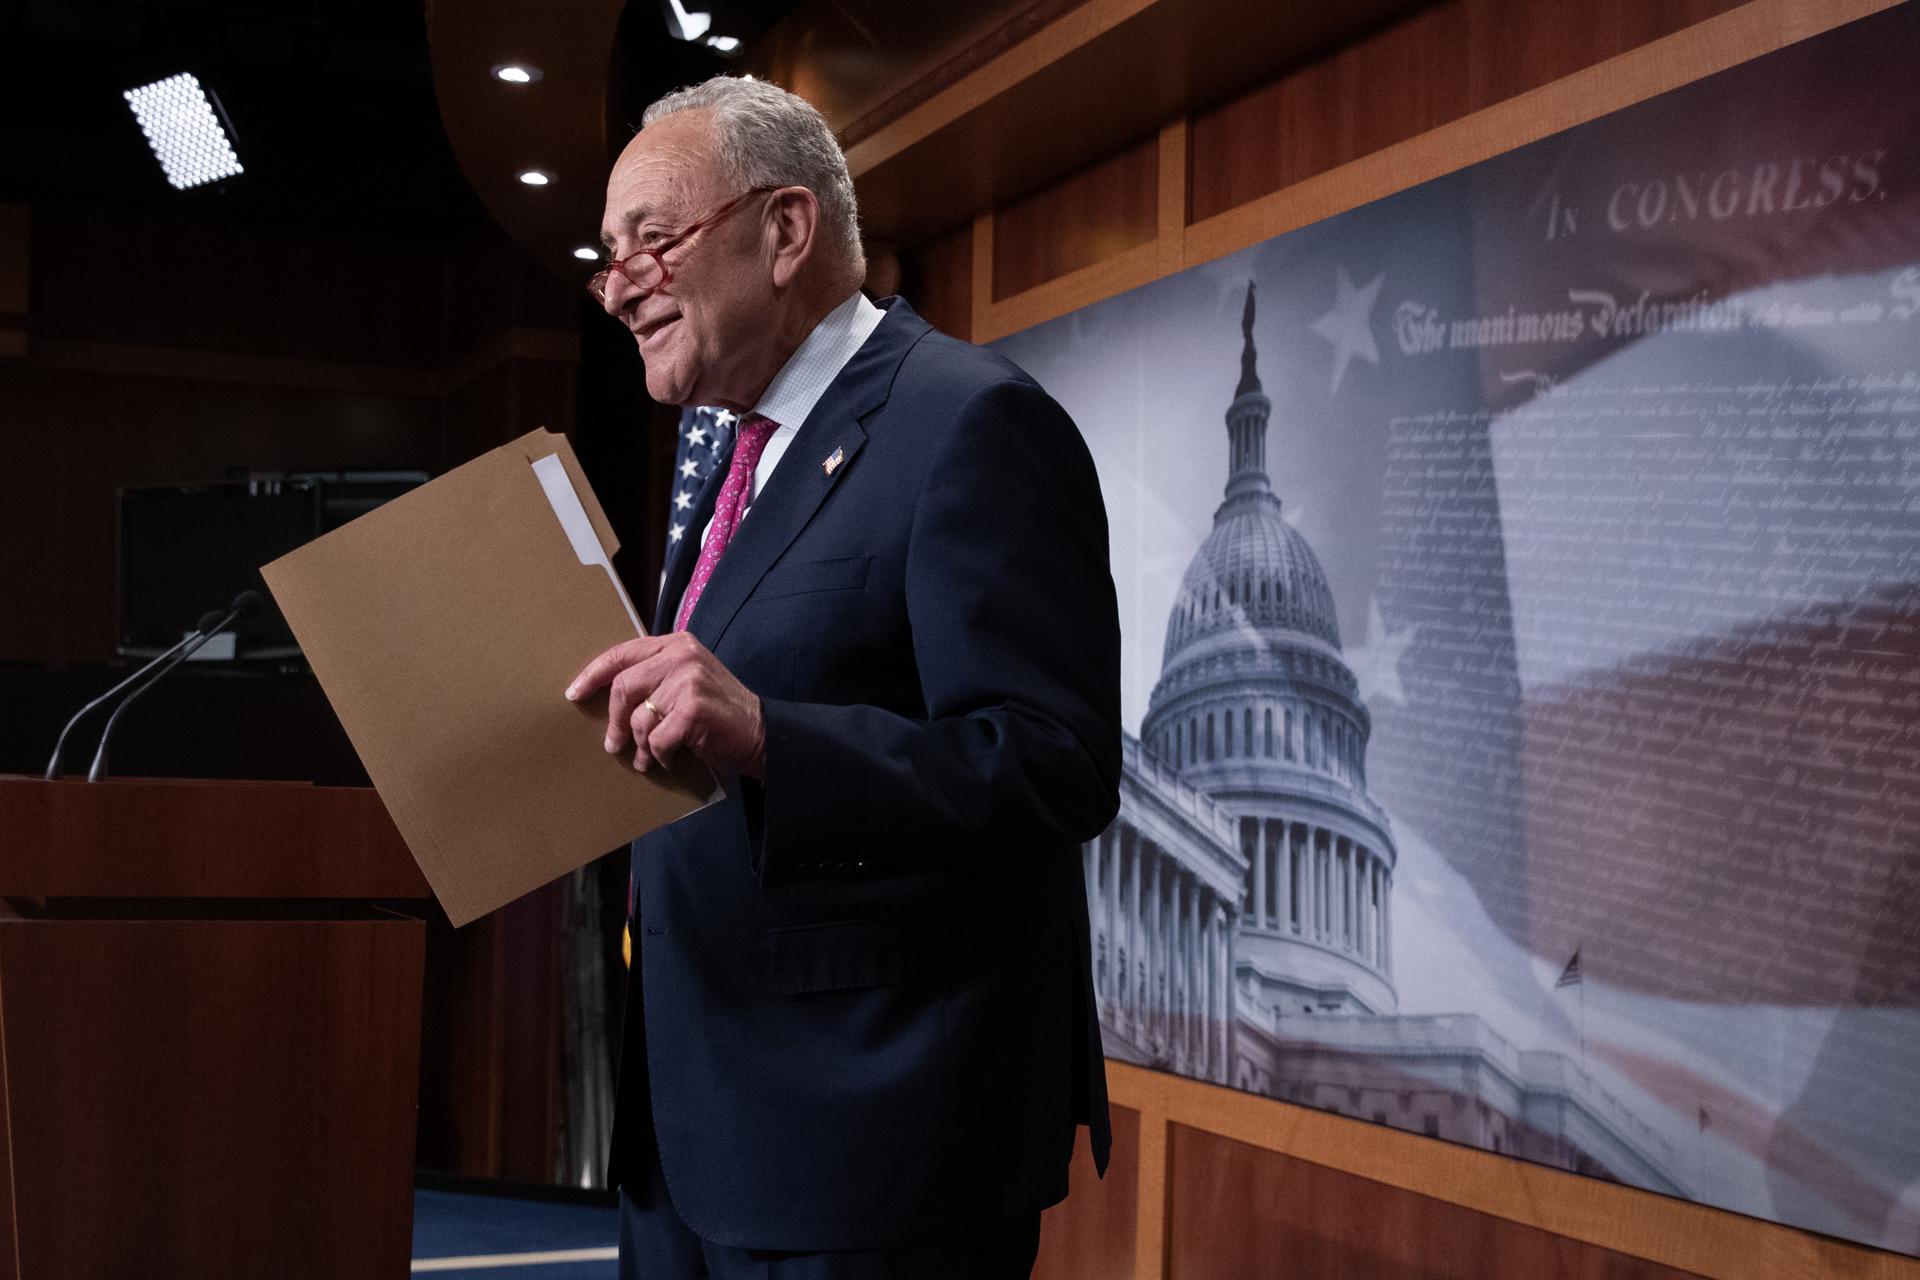 Senate Majority Leader Chuck Schumer concludes a news conference after the Senate passed legislation to raise the debt ceiling, on Capitol Hill in Washington, DC, USA, 01 June 2023. EFE-EPA/MICHAEL REYNOLDS